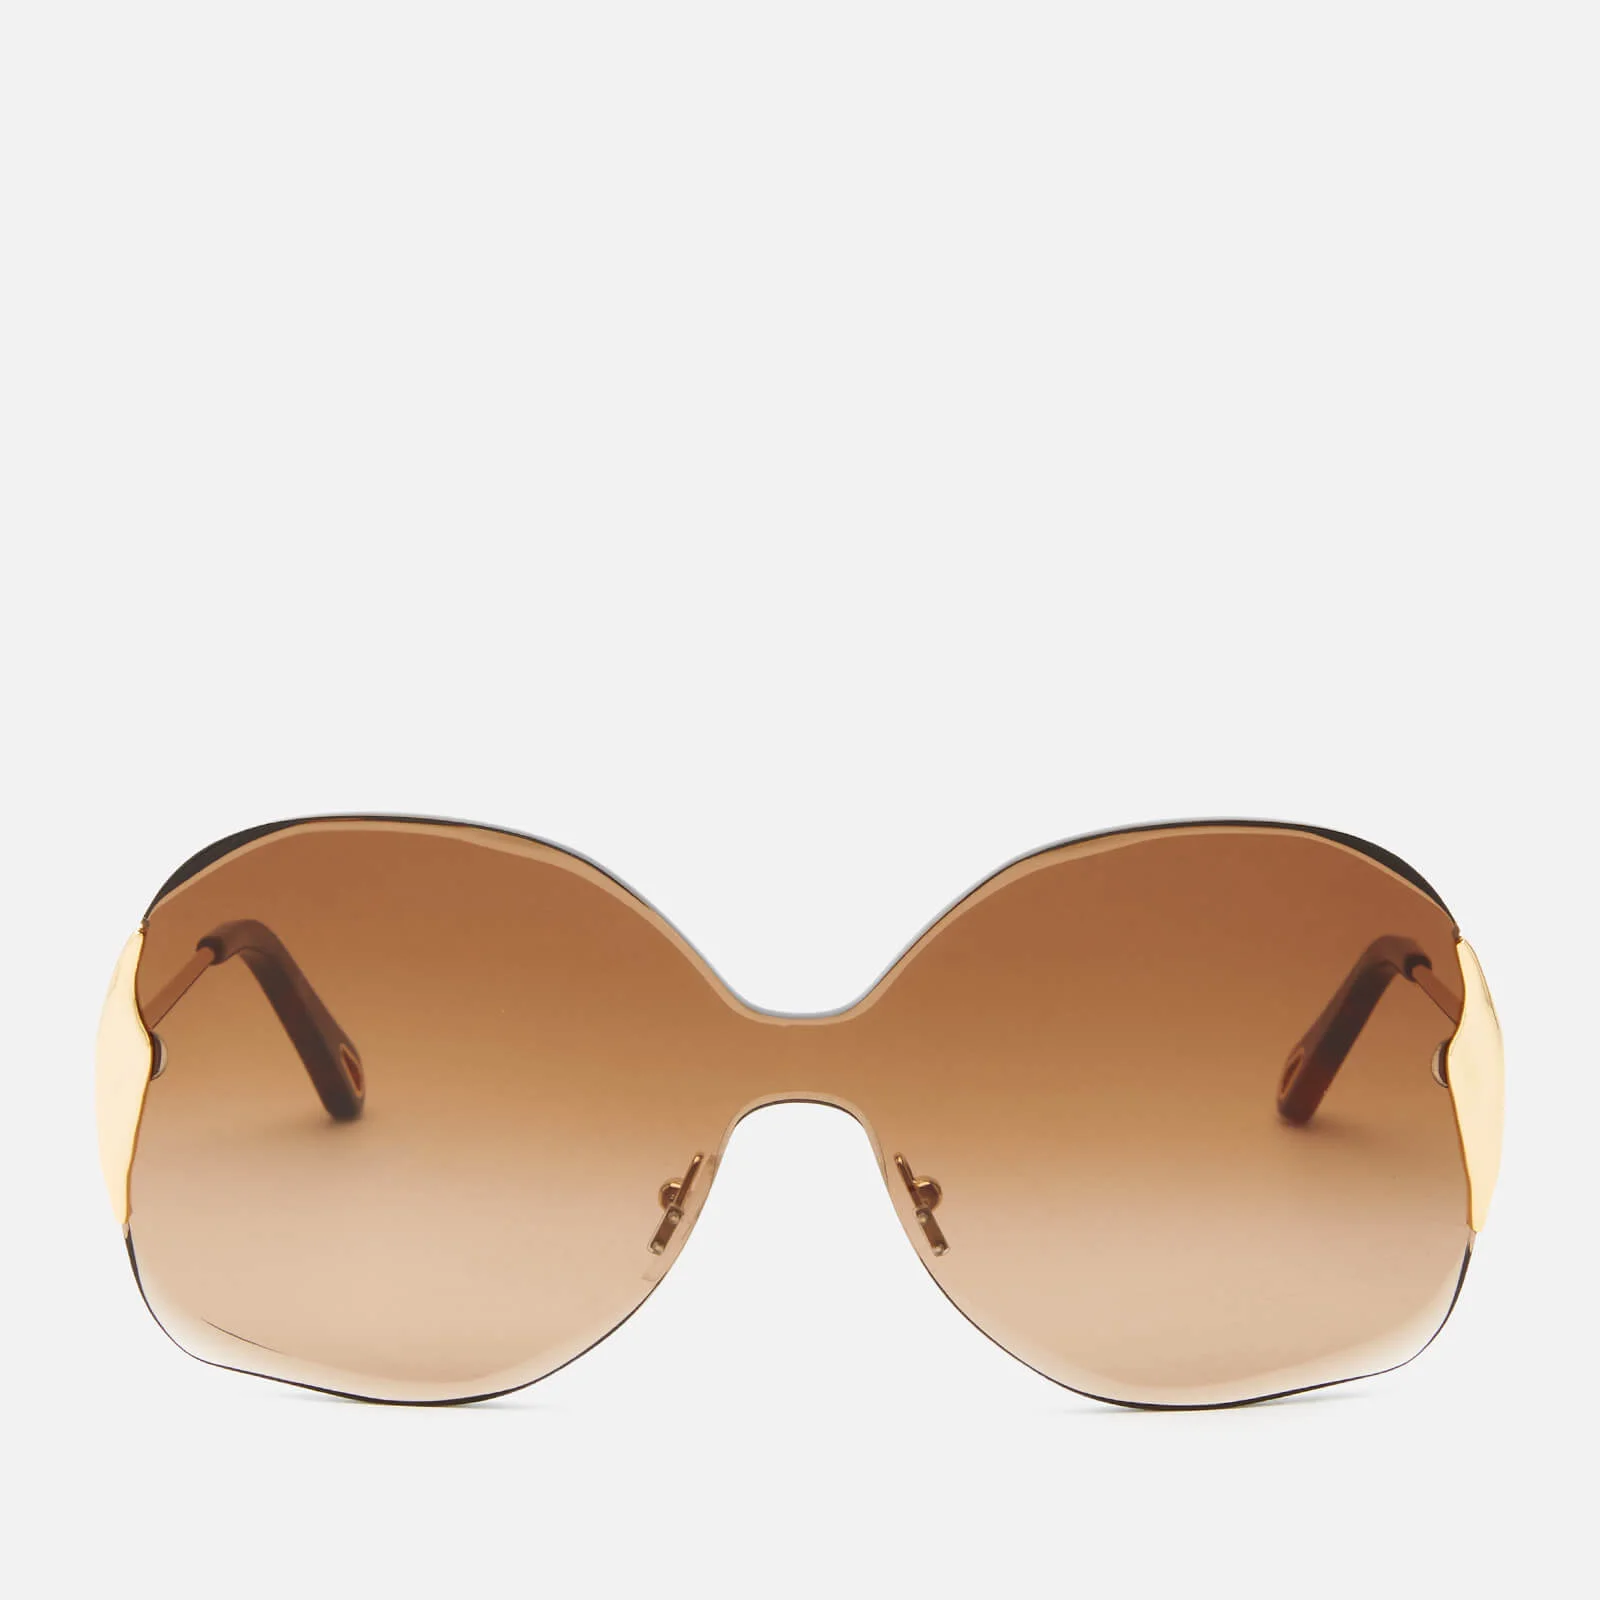 Chloé Women's Curtis Square Frame Sunglasses - Gold/Gradient Brown Image 1